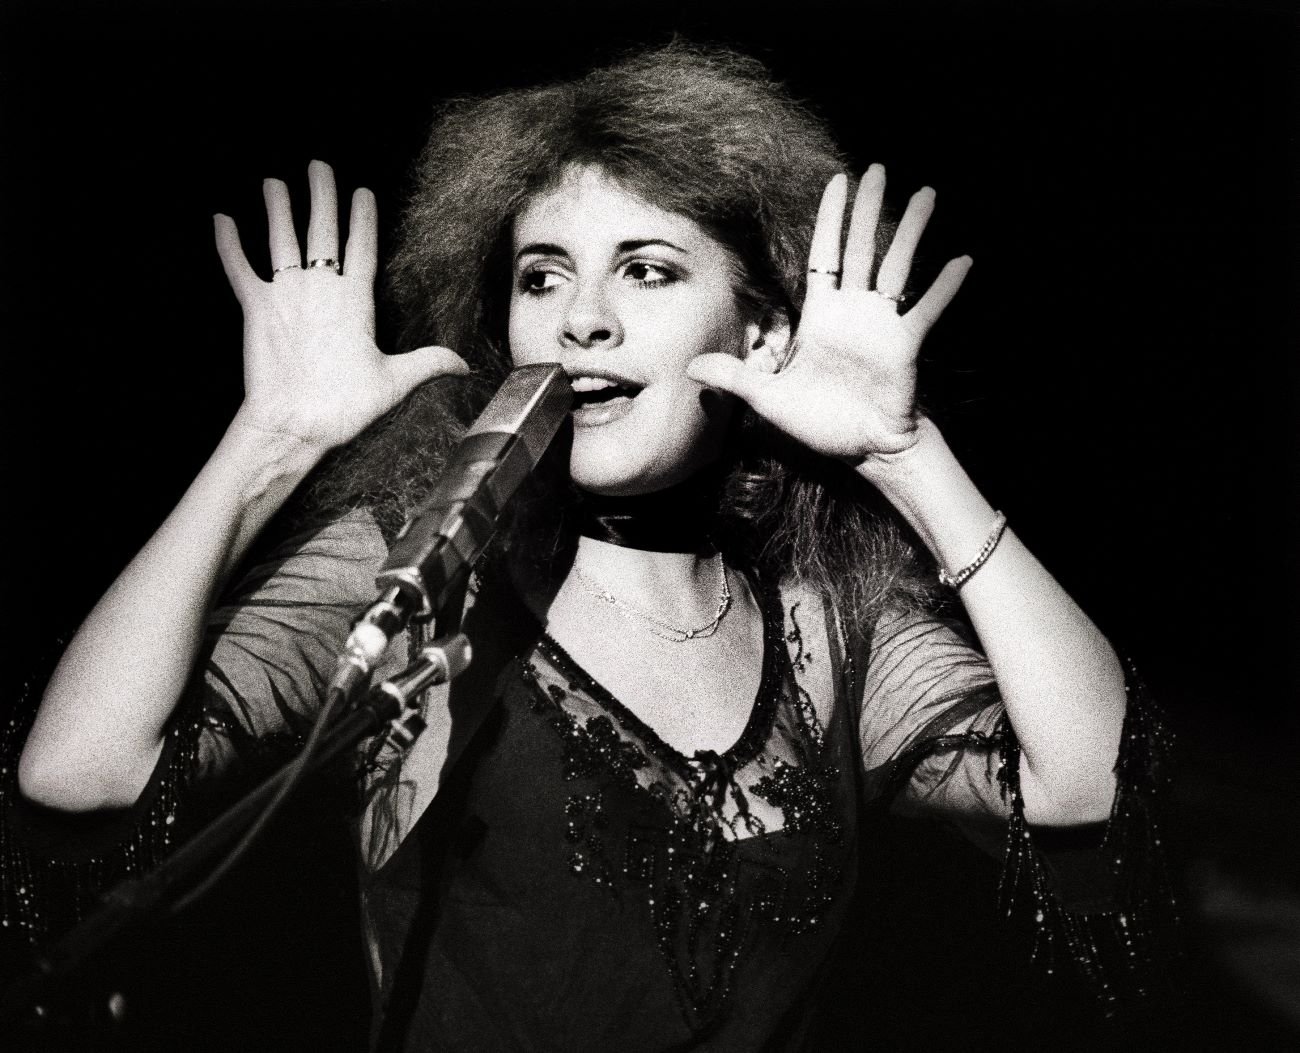 A black and white picture of Stevie Nicks wearing a lace dress and standing in front of a microphone.